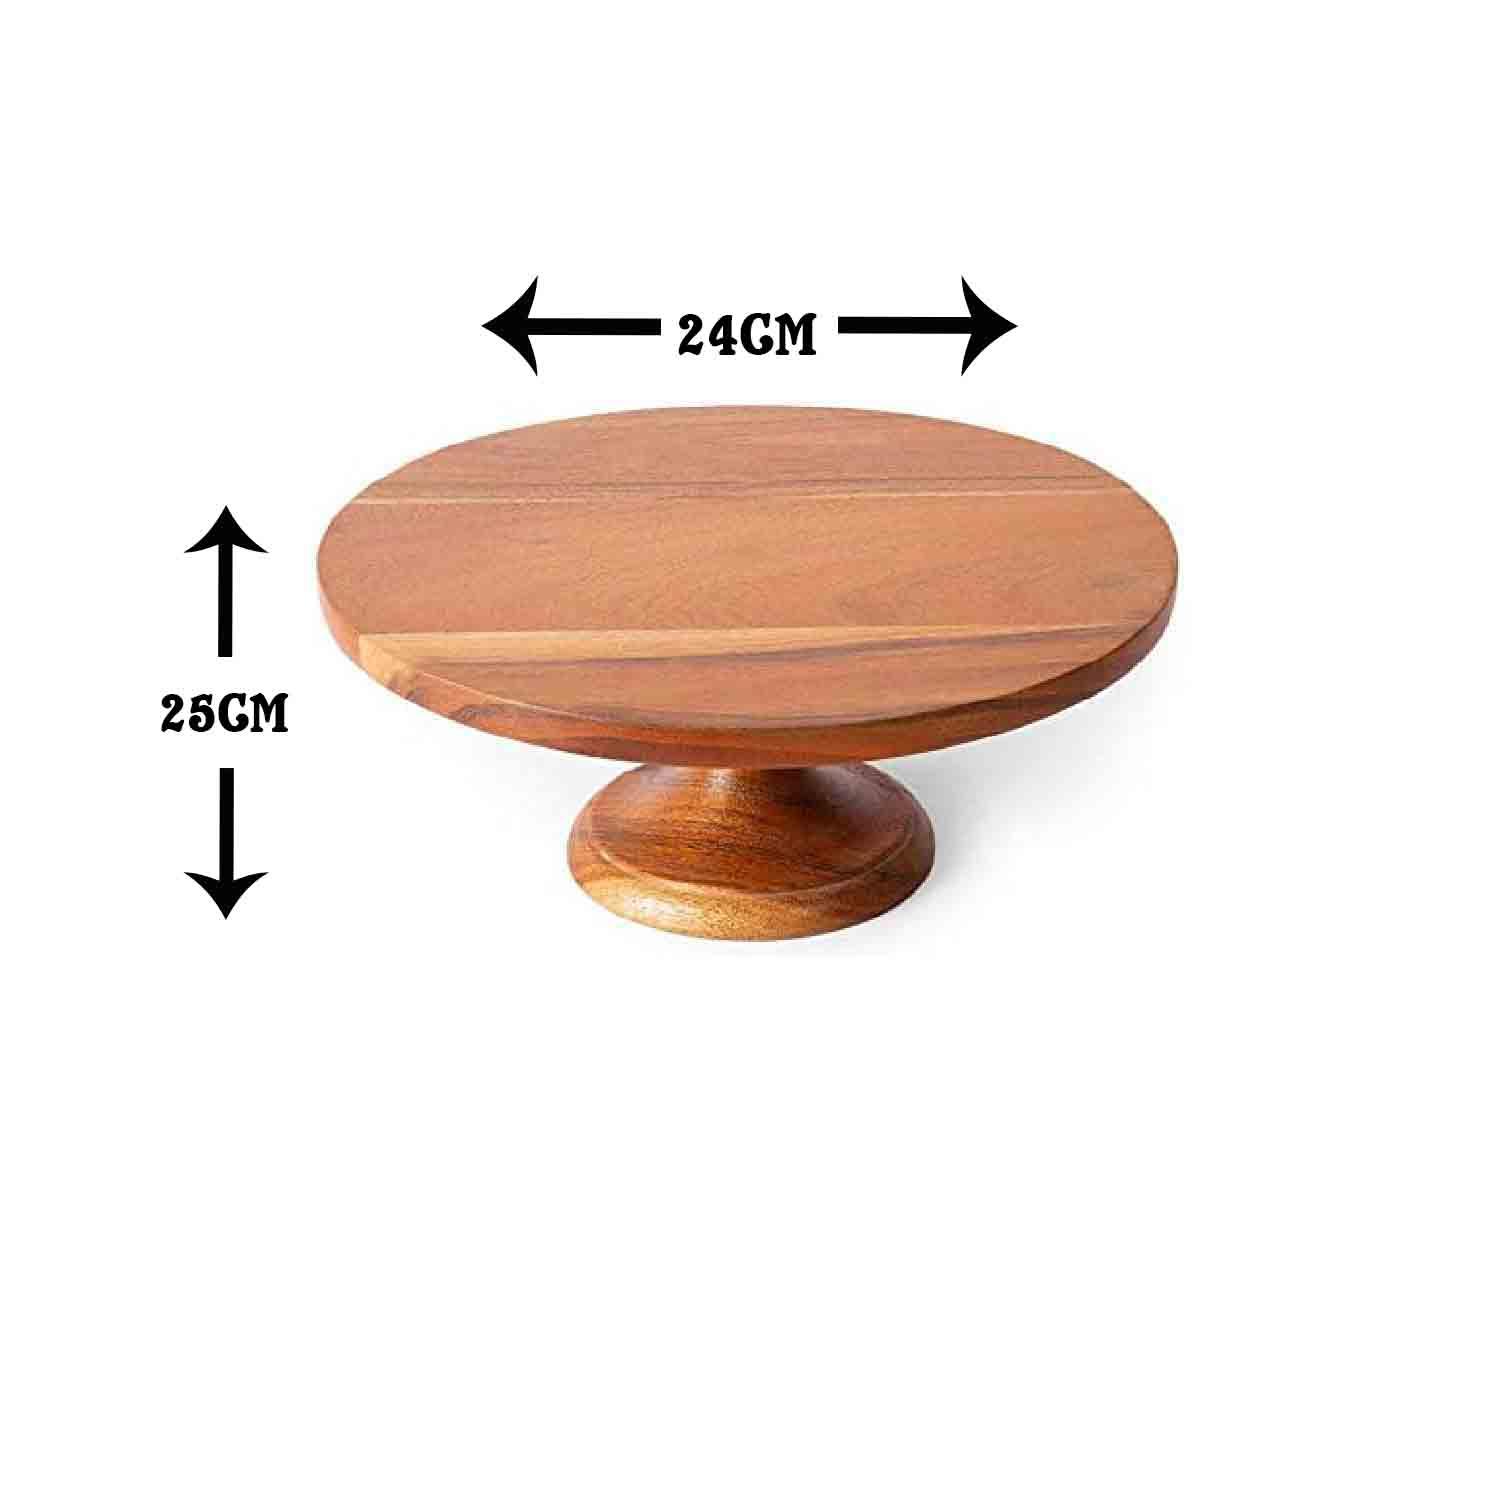 1PC 24CM DIAMETER X 25CM HEIGHT WOODEN TOP CAKE STAND